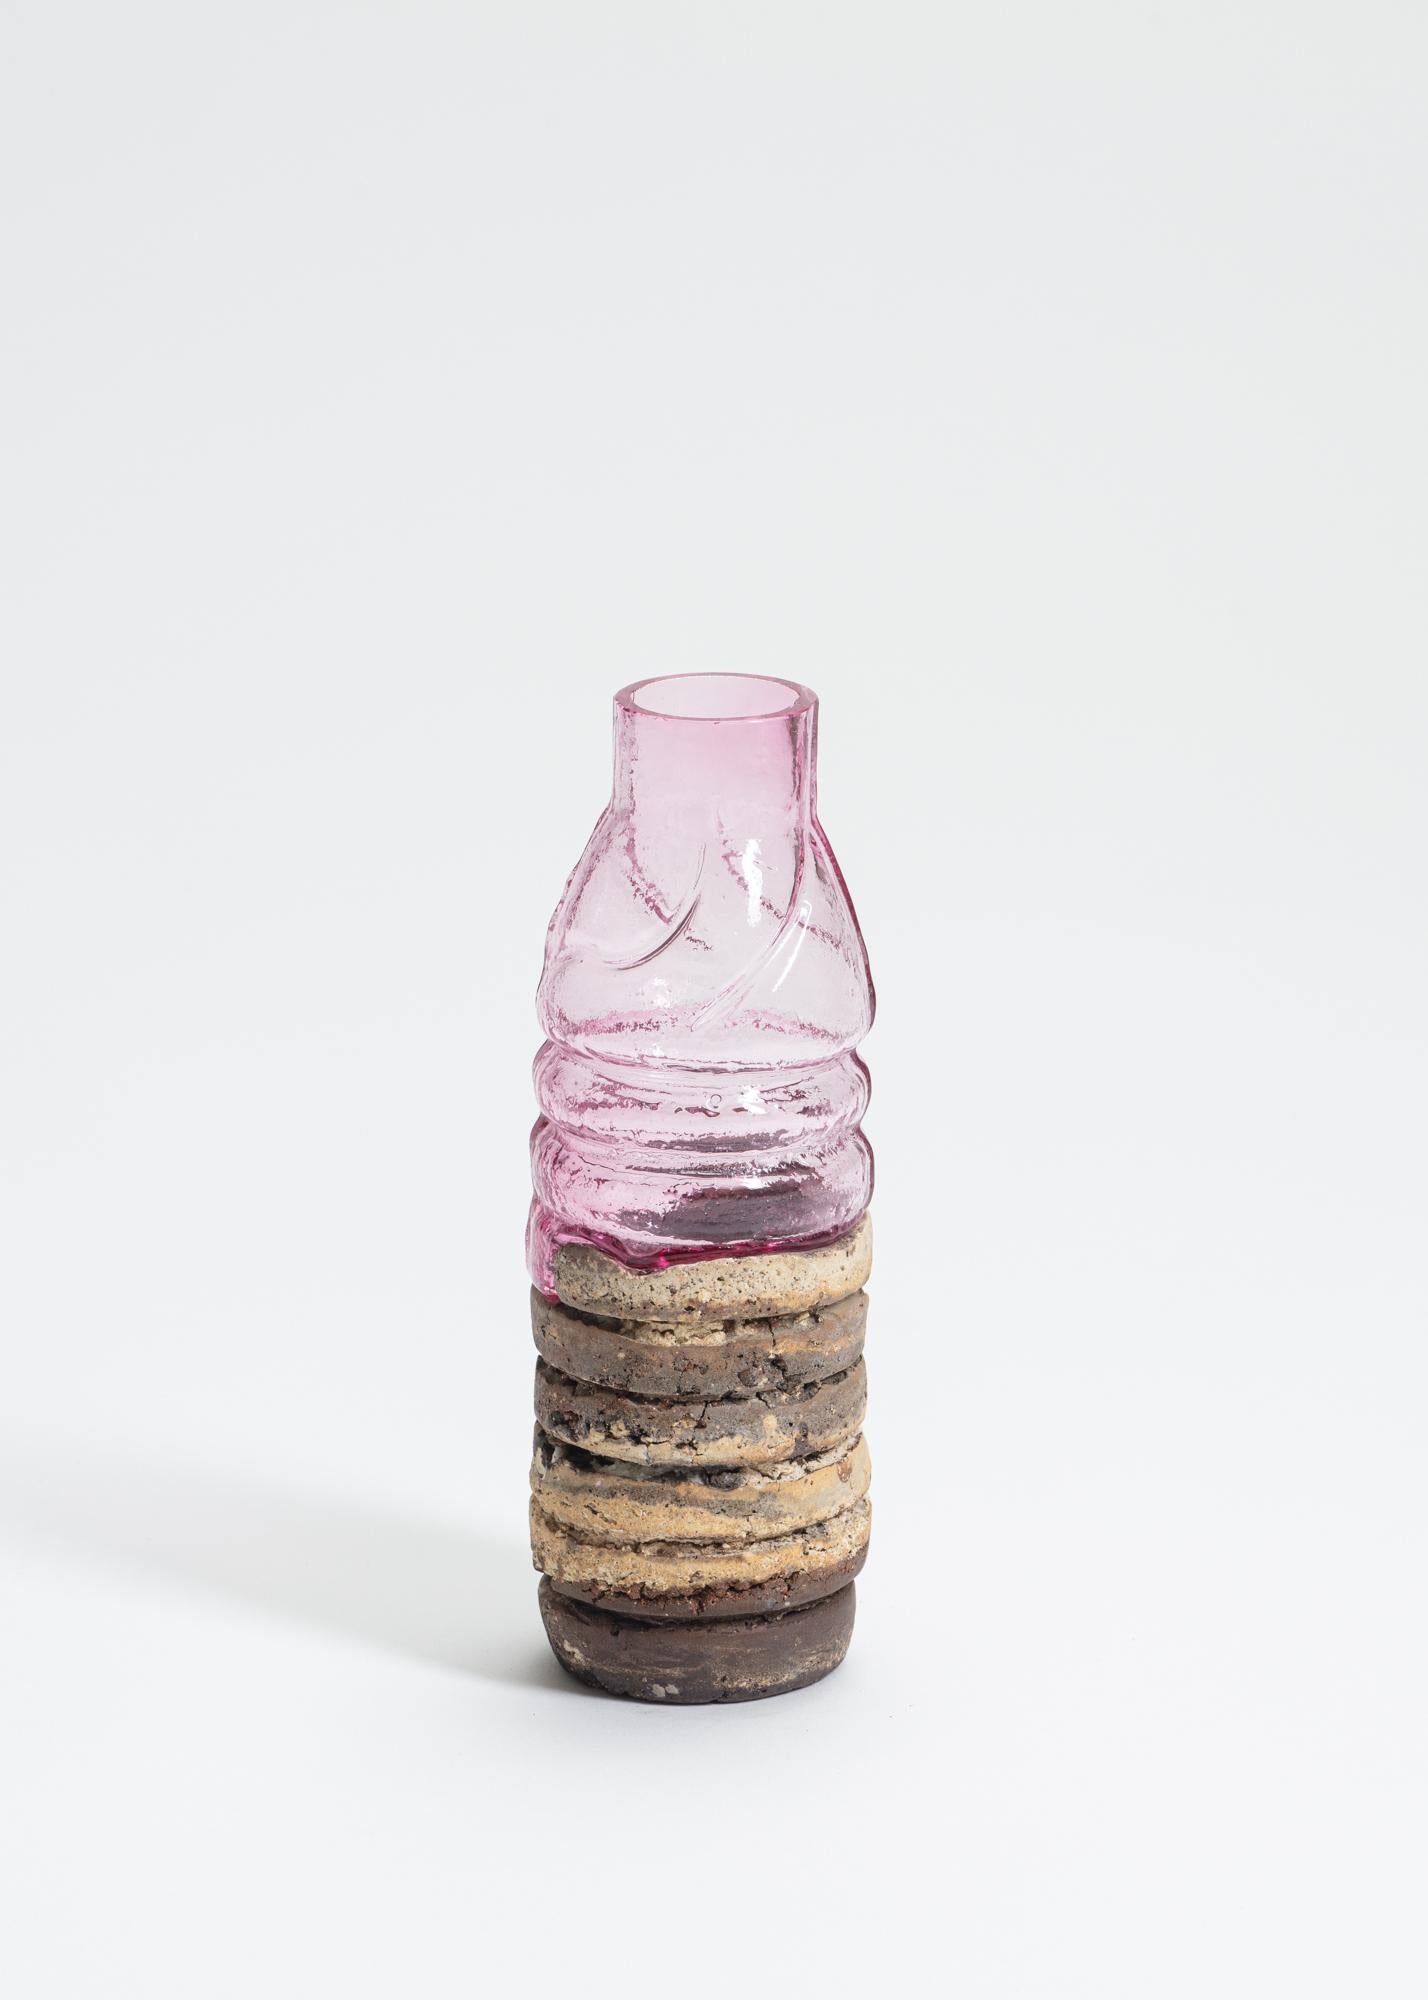 FUWA FUWA, No 13 bottle by Yusuke´ Y. Offhause
One of a Kind, the work is in two parts (ceramic and glass).
Dimensions: D 7.5 x W 7.5 x H 19.5 cm.
Materials: stoneware, porcelain, glass.

Yusuke´ Y. Offhause:
